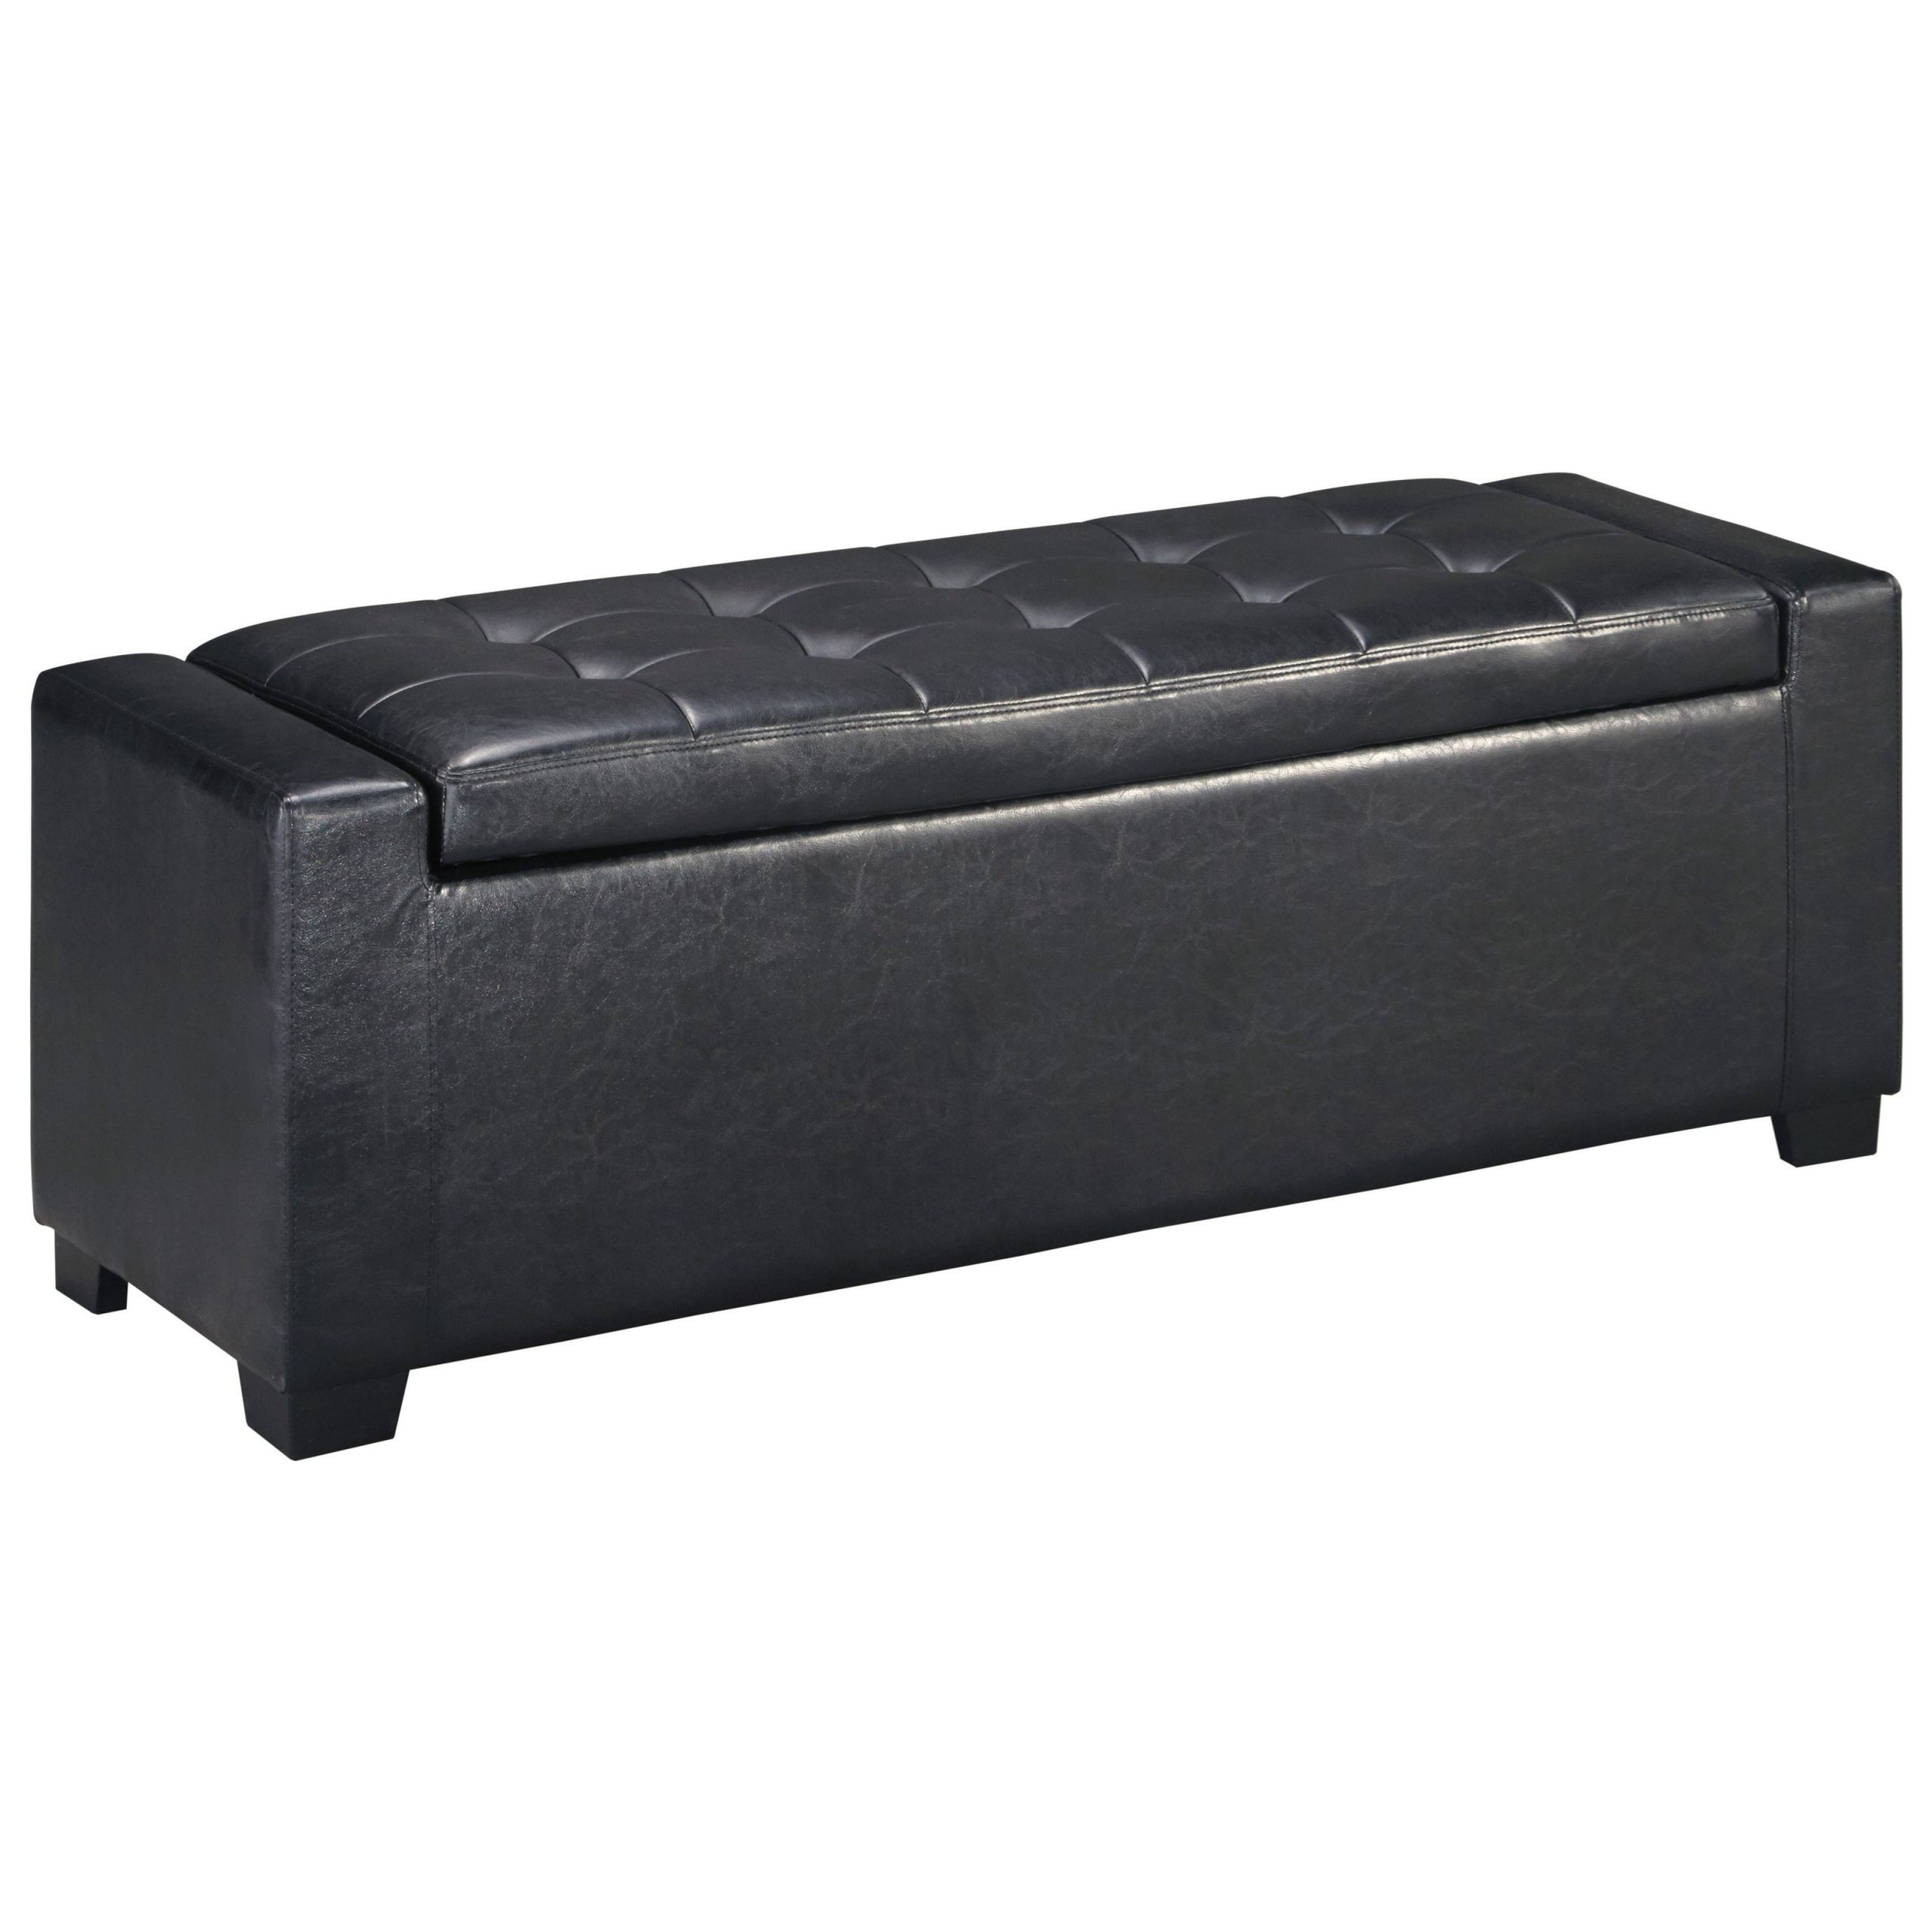 Black Tufted Storage Bench
 Upholstered Storage Bench in Black Faux Leather with